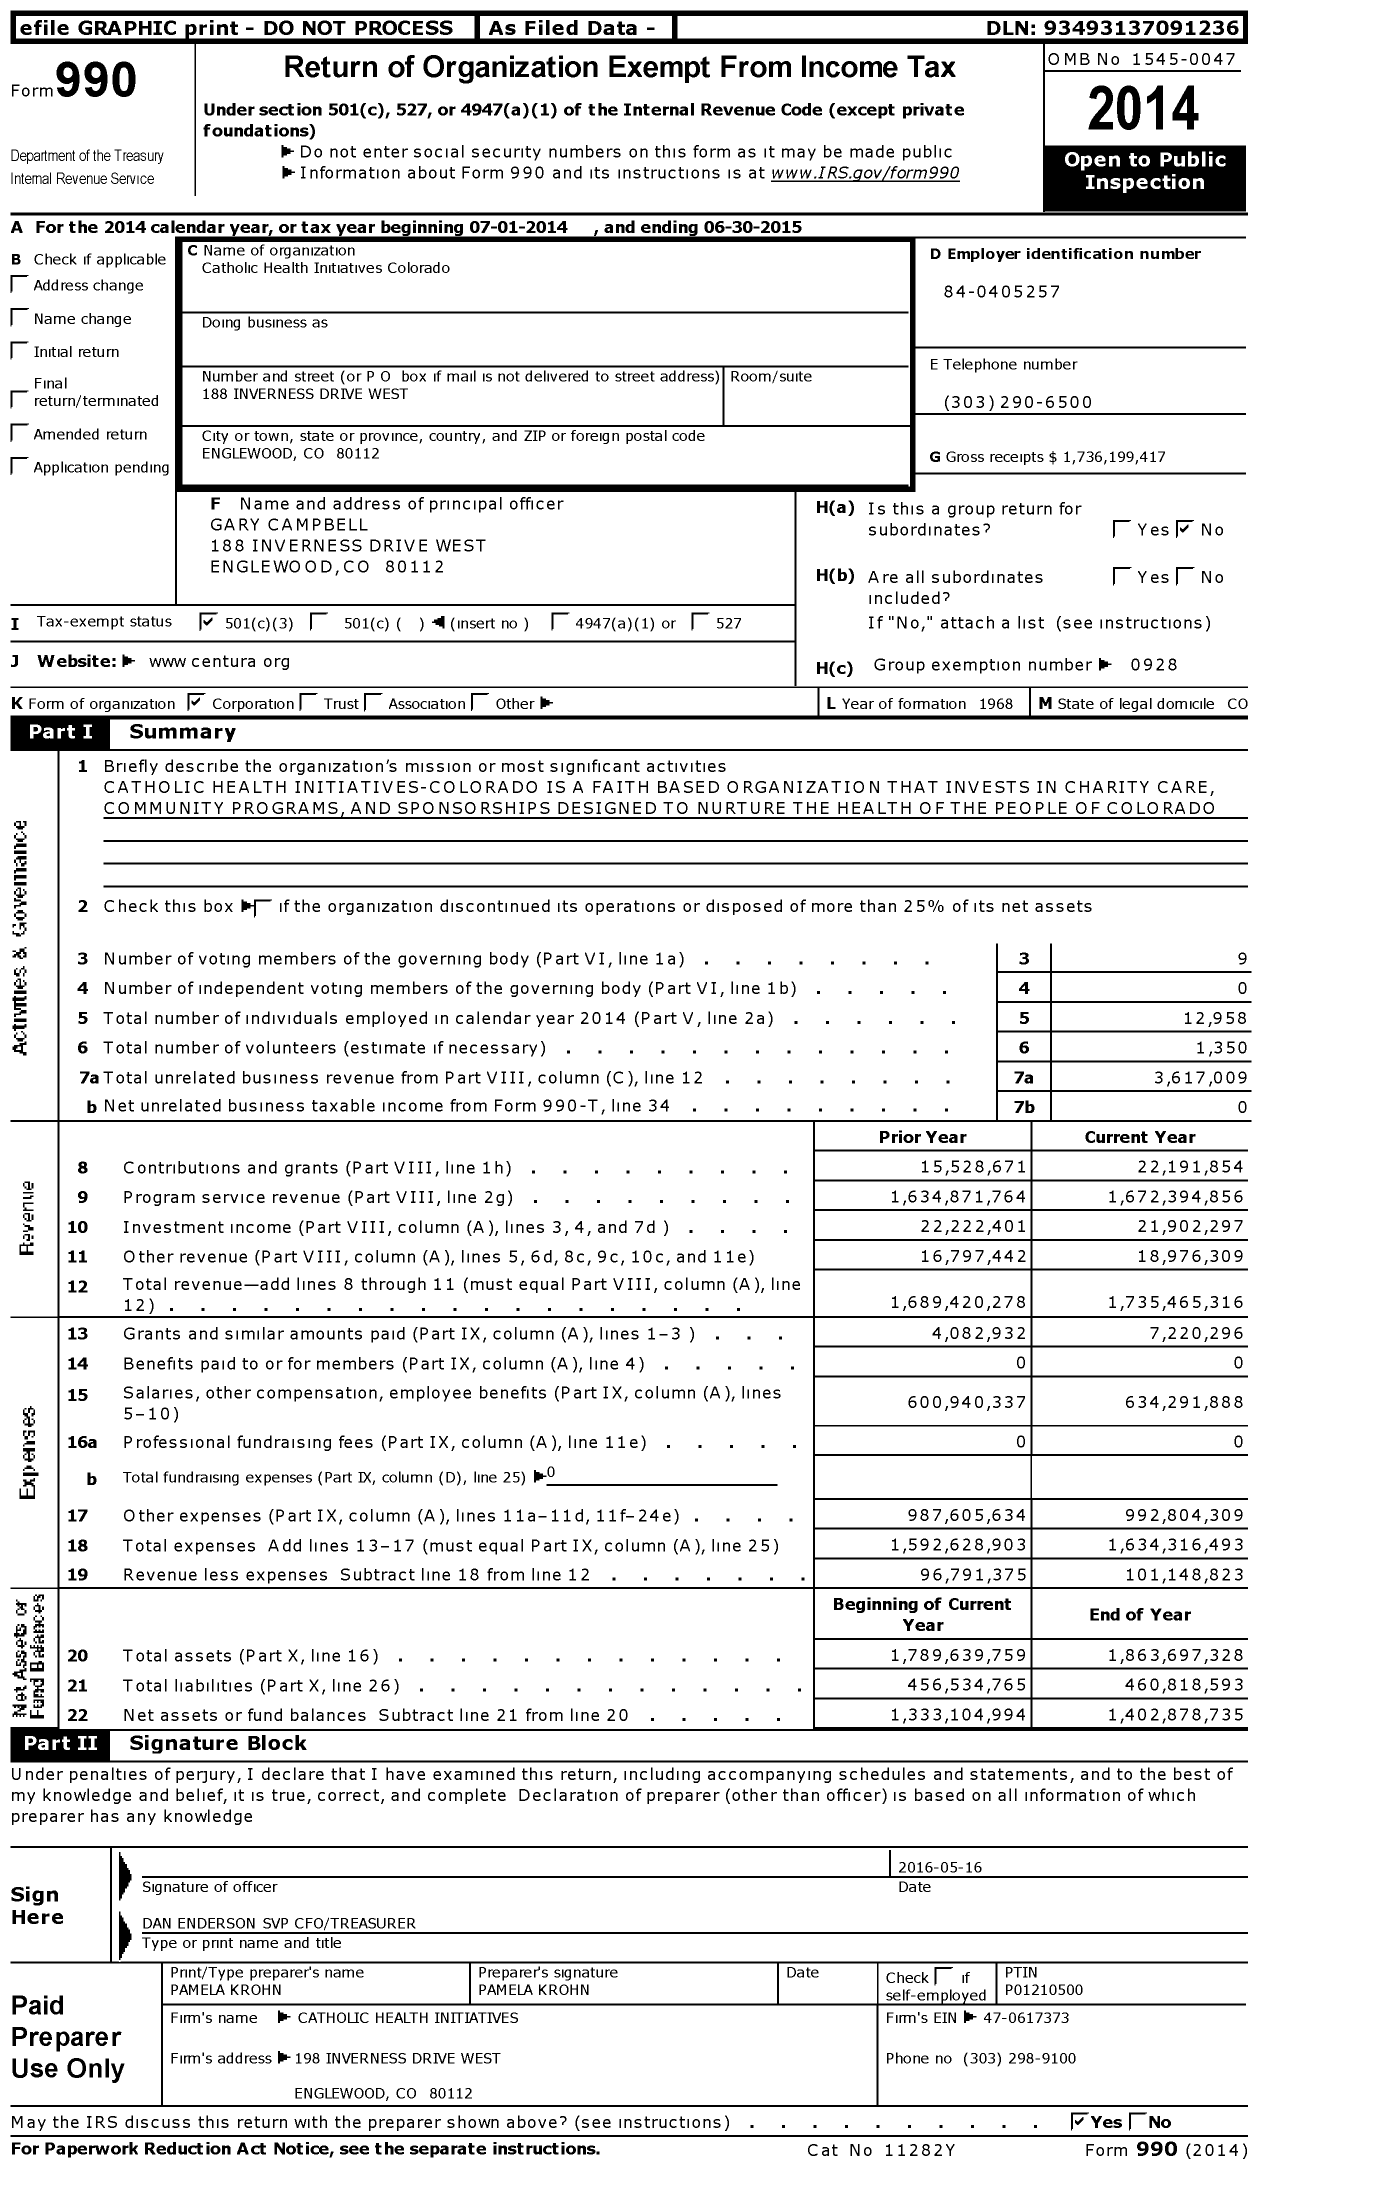 Image of first page of 2014 Form 990 for Catholic Health Initiatives (CHI)